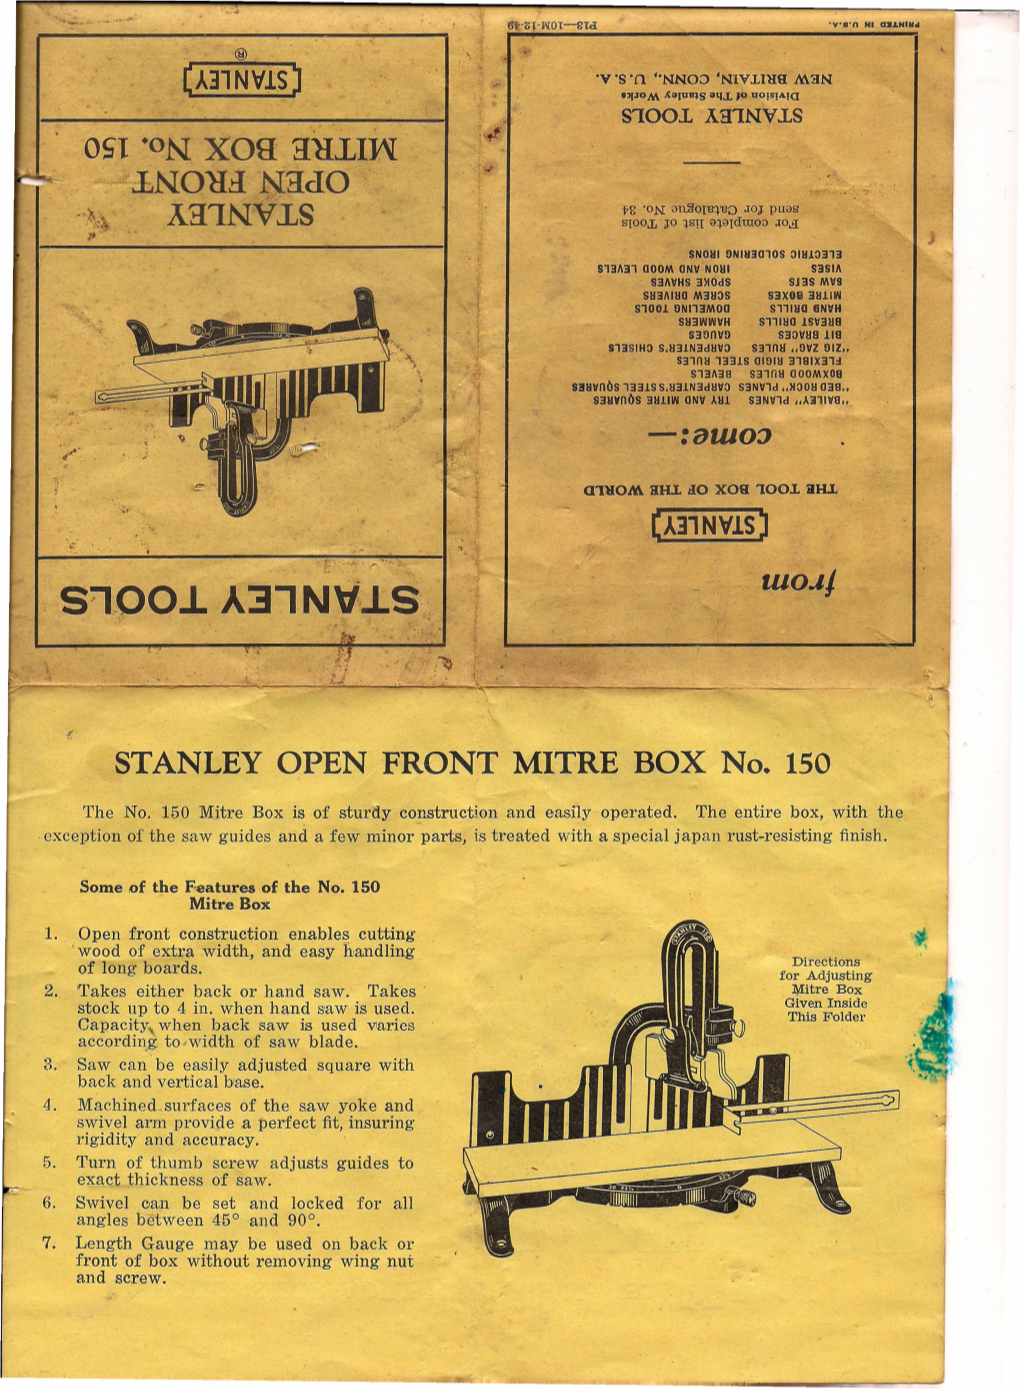 Download the Stanley No. 150 Miter Box Manual